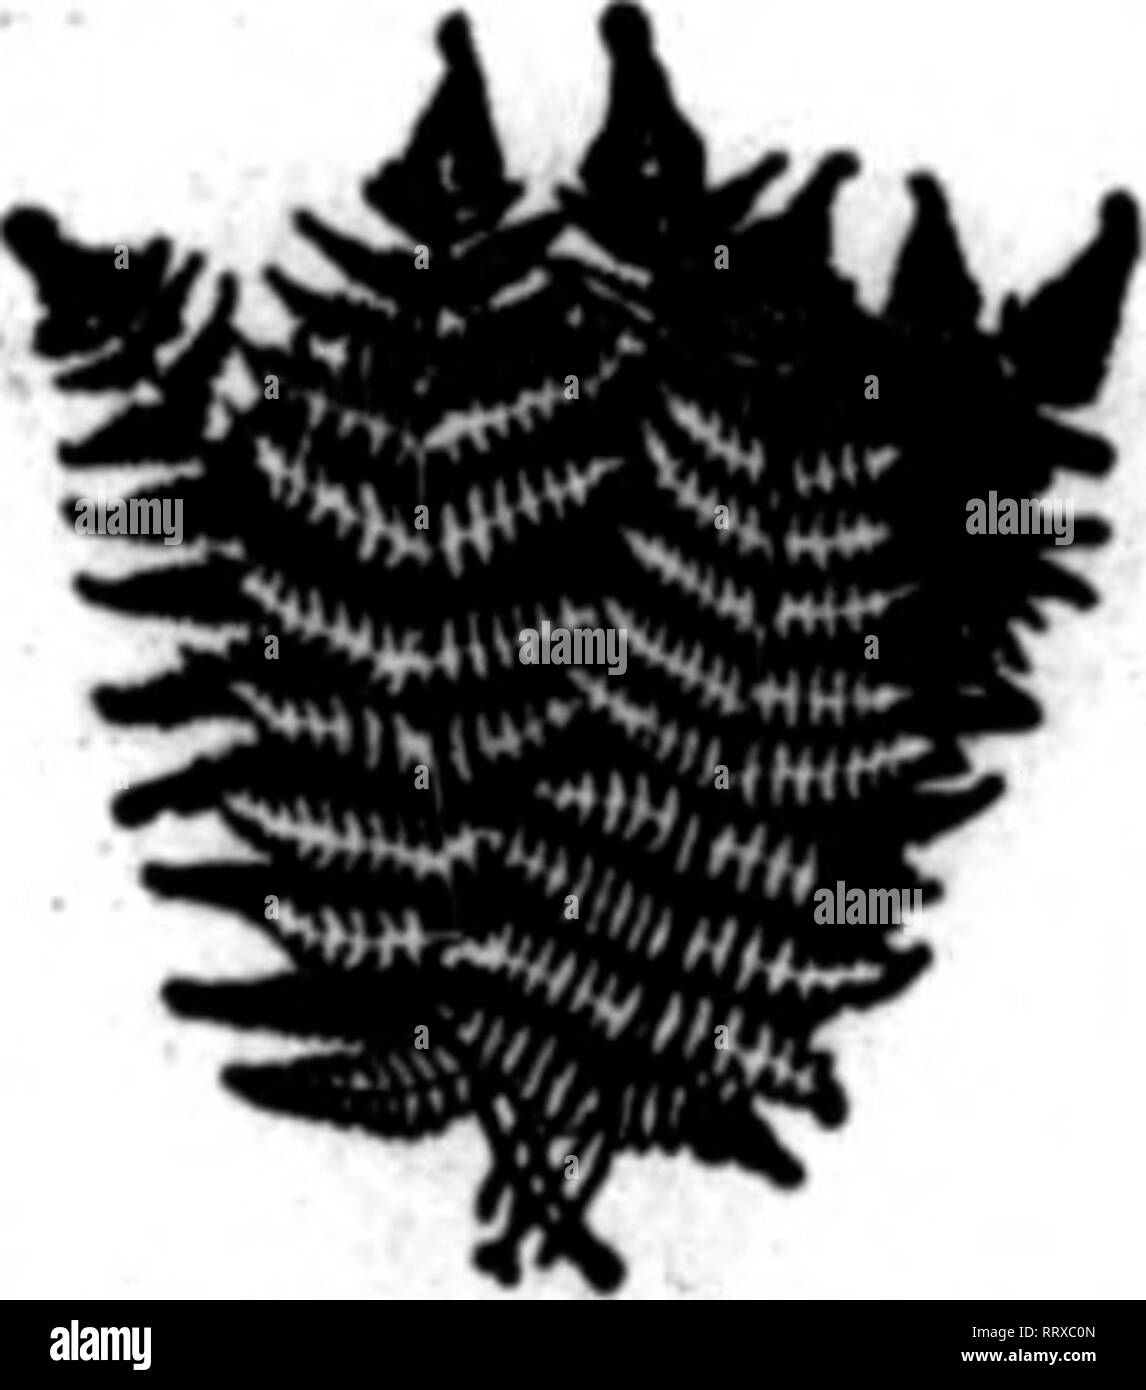 . Florists' review [microform]. Floriculture. NEW CROP NOW READY FERNS AND QRECN QALAX AND LEUCOTHOE. Dagger and Fancy Ferns, 1000, $1.00; case of 5,000, $4.00 Qreen Oalax 1000, .50; case of 10,000, 4.00 Bronze Oalax (case lots only).... $5.00 per case of 10,000 Green Leuoothoe (long) $2.00 per 1000 Green Leucothoe (short) l.OOperlOOO When In a hurry, wire us at Elk Park. N. C. THE NORTH CAROLINA EVERGREEN CO. BANNERS ELK, N. C.. Mention The Review when yoo write. I A. A. GIBBONS, Red Level, Ala. i Kng.?.: Wild Smilax i Holly, MisUetse, Fancy ani Dagger Ferns, Needle T Pines, Natural »»i Perfe Stock Photo